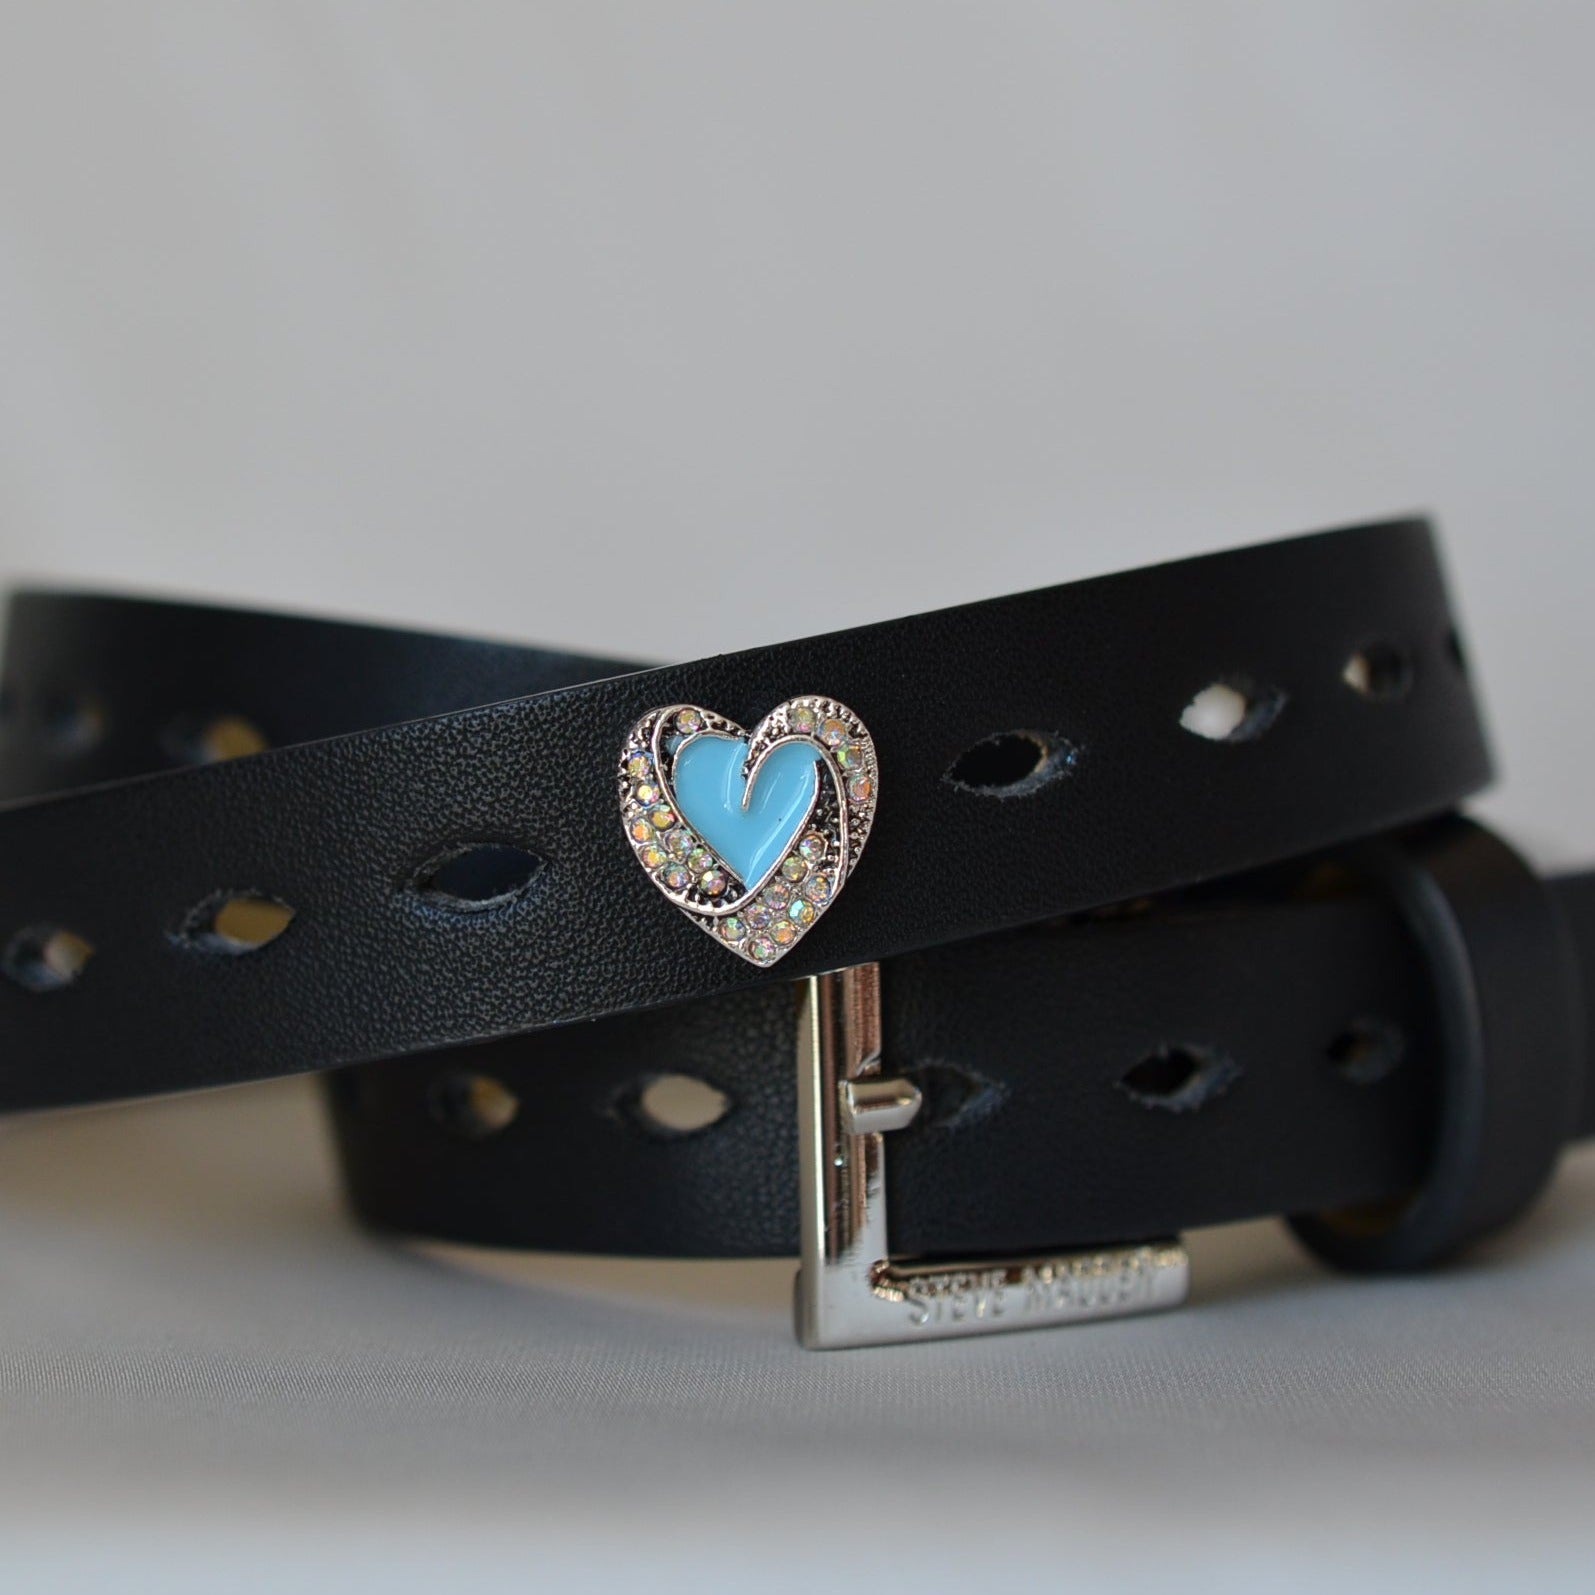 Beautiful Blue Heart with AB Rhinestone Charm for Belts, Bags and Watch Bands